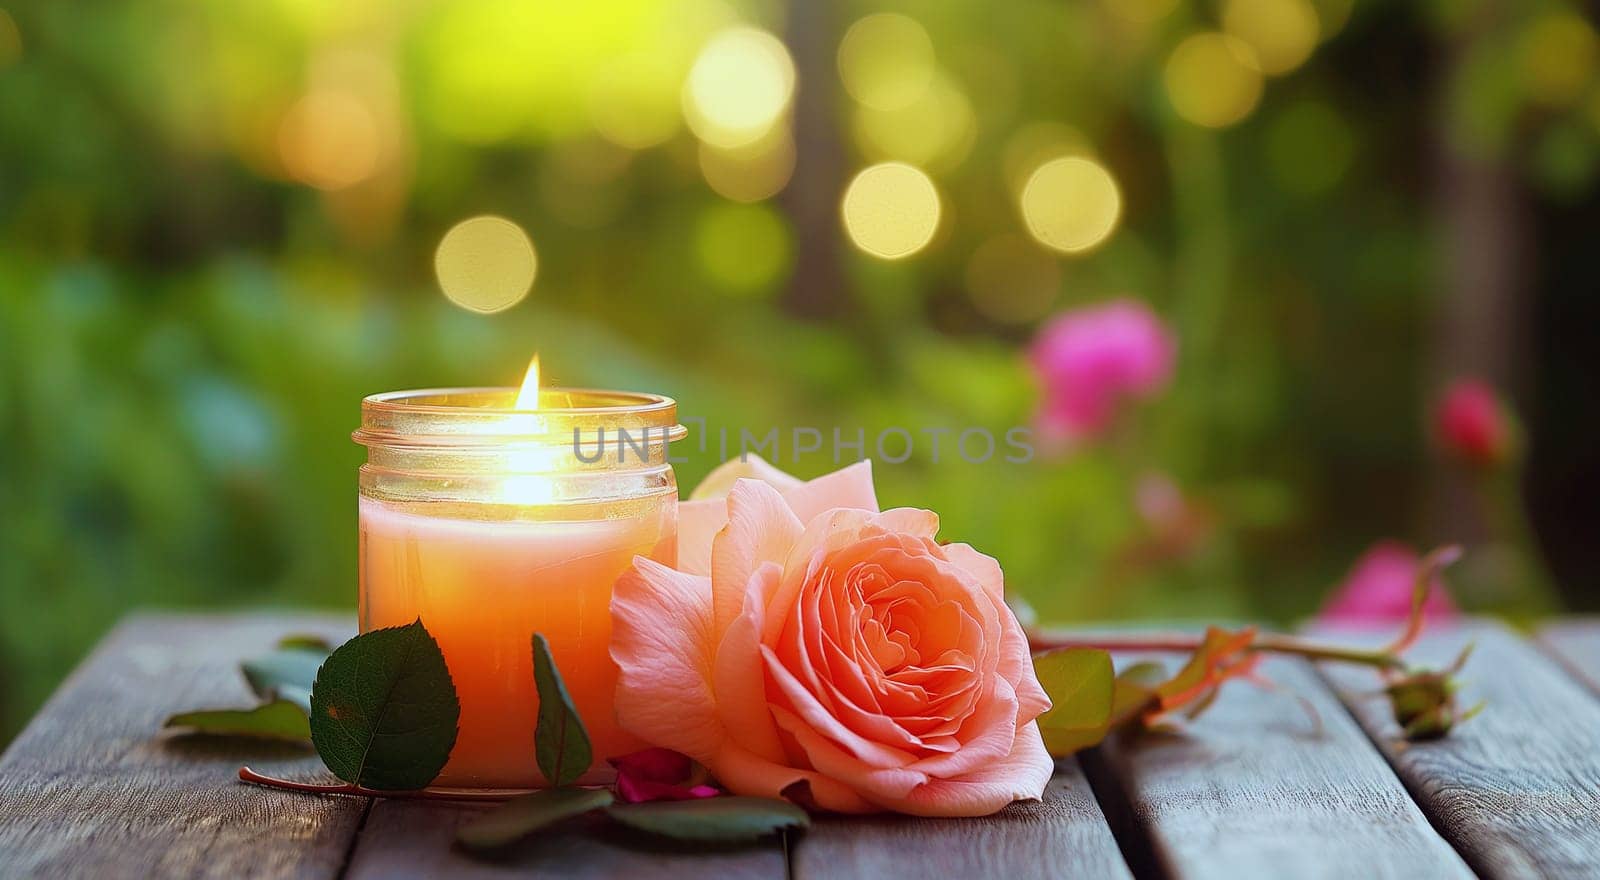 A lit scented candle in a glass jar beside a fresh pink rose on a wooden surface with a blurred natural green background. High quality photo